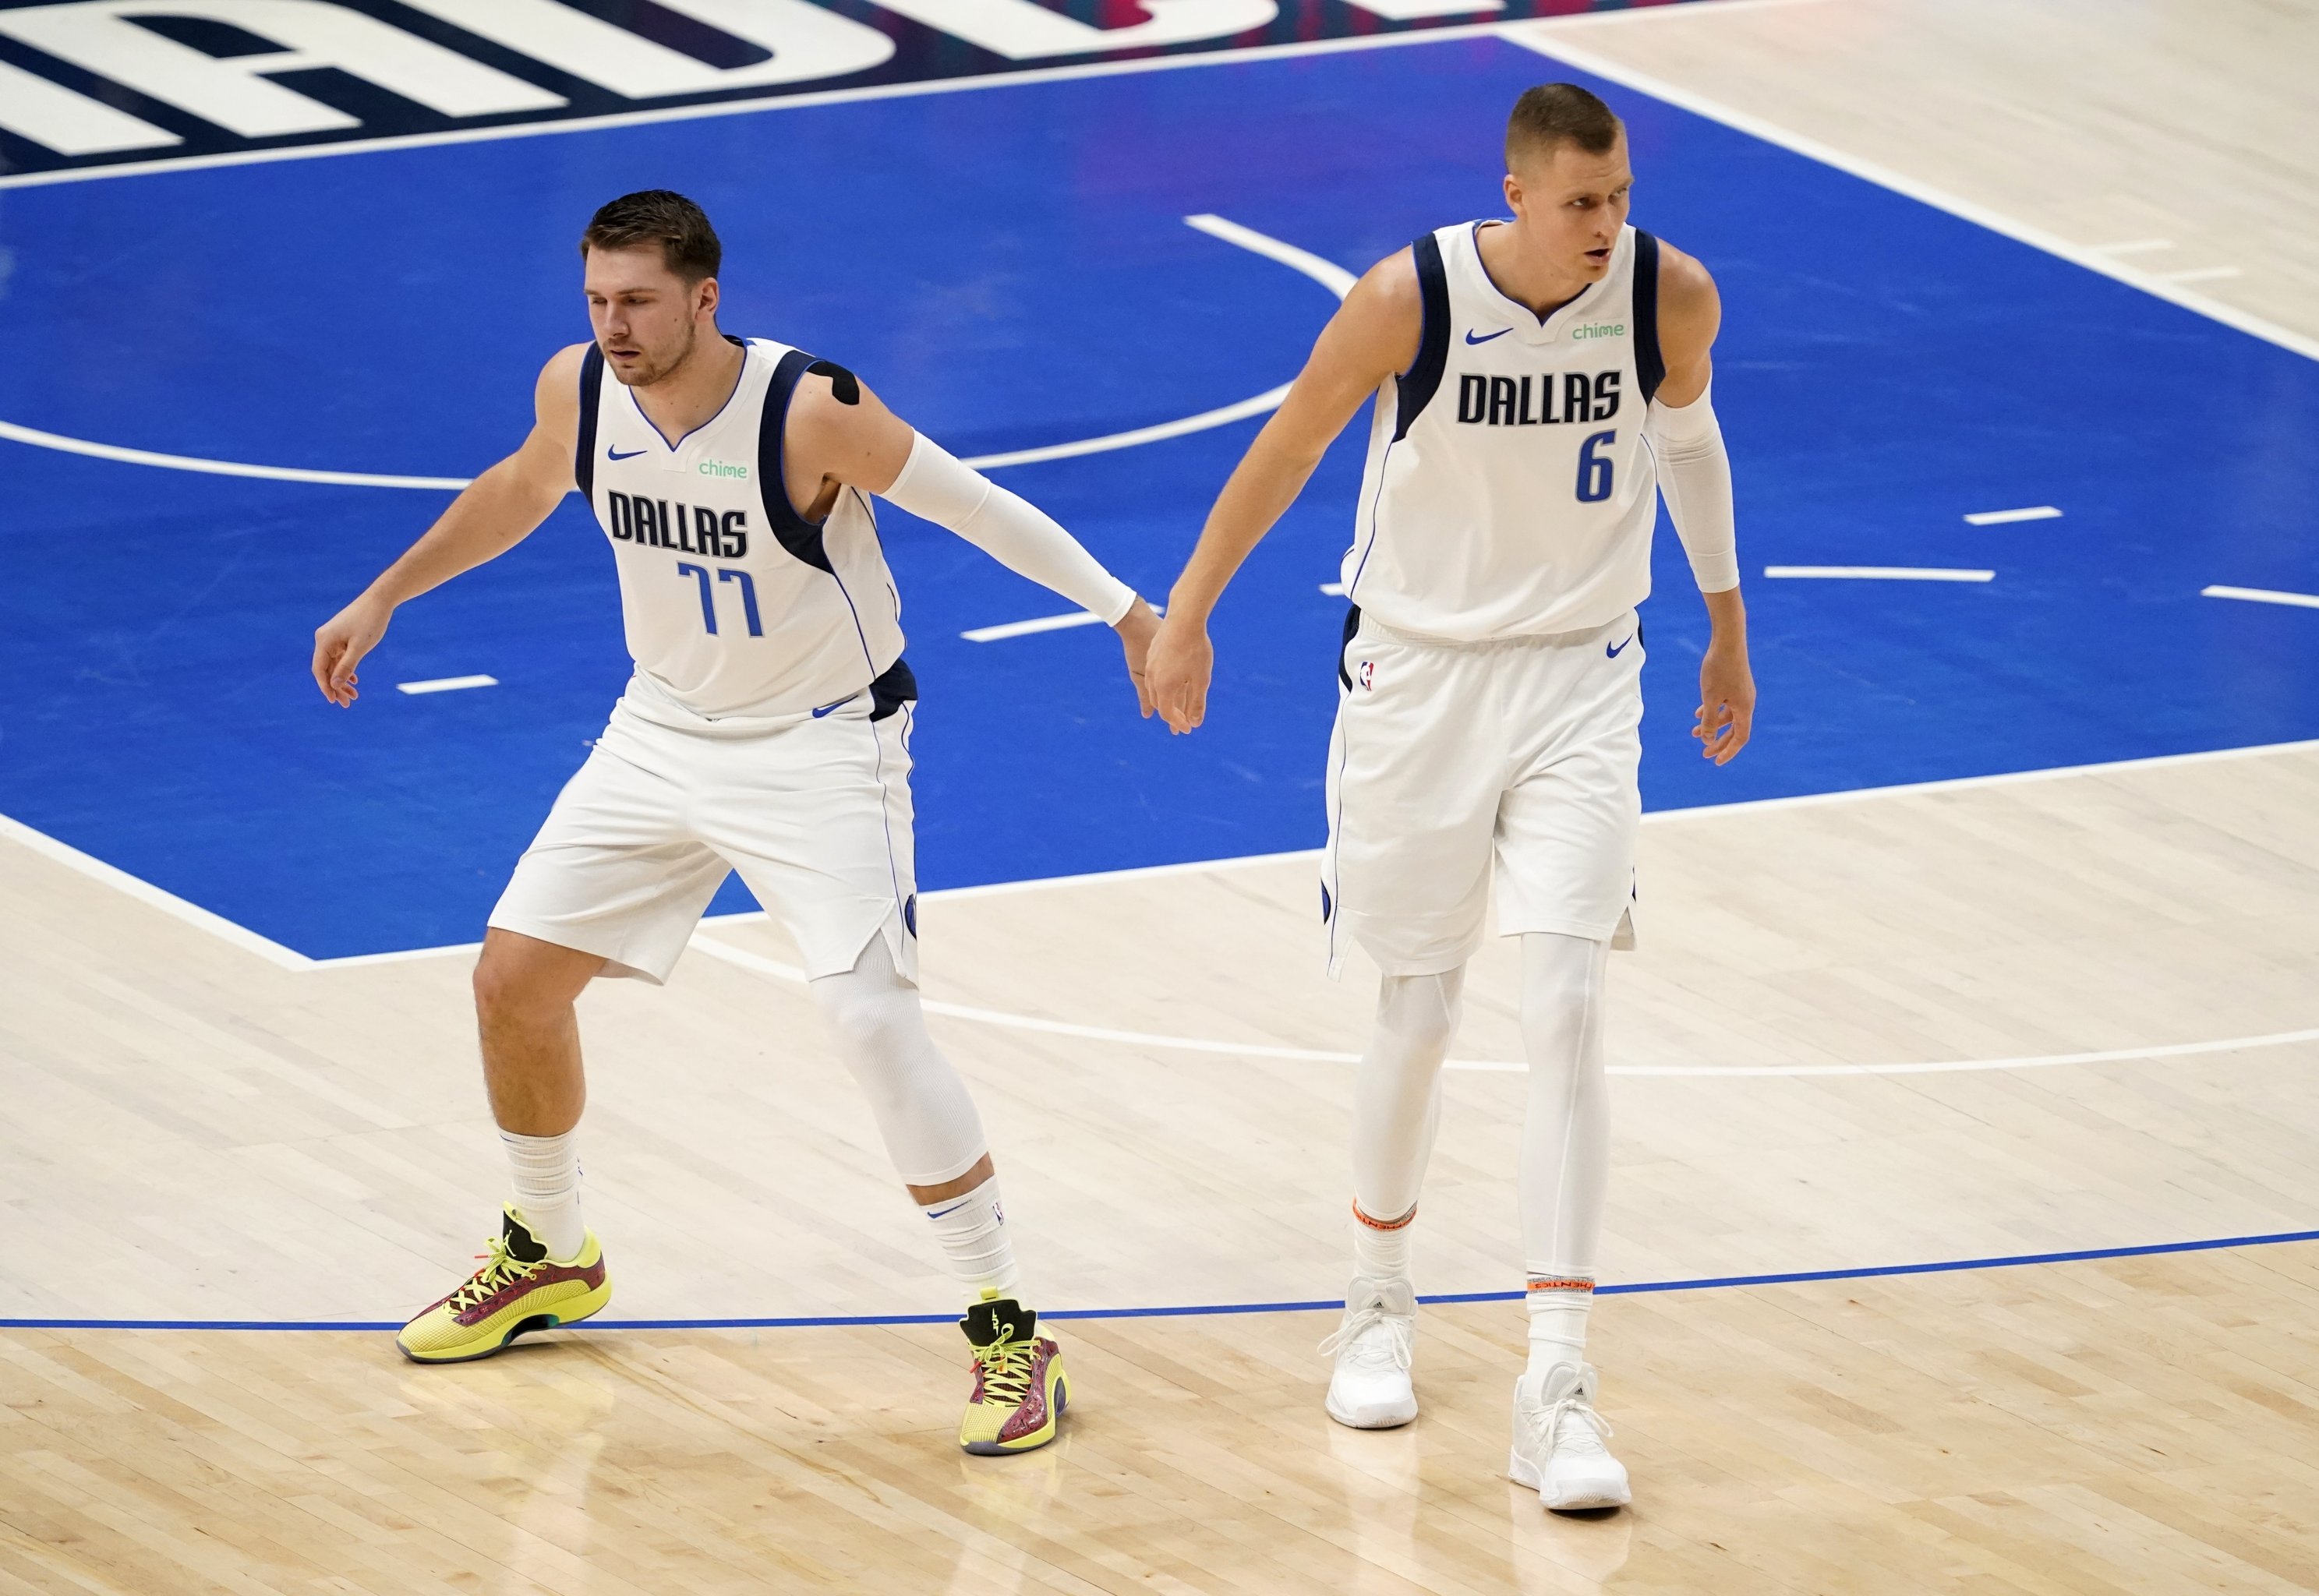 Paul George and Klay Thompson tease Luka Doncic after intense